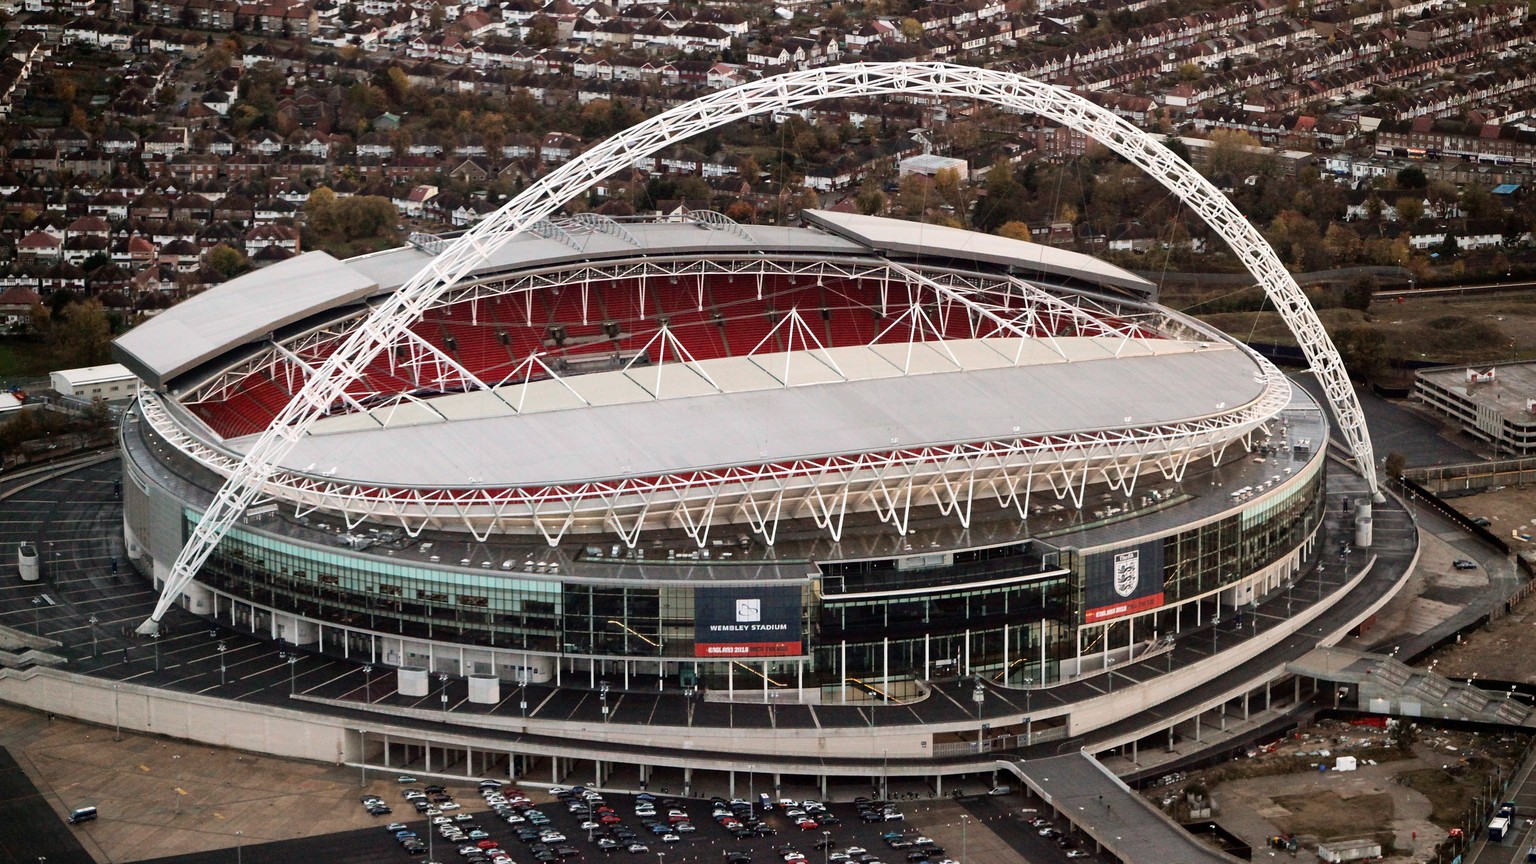 LONDON, ENGLAND - NOVEMBER 04: An aerial view of Wembley Stadium on November 4, 2009 in London, England. The UK&#039;s capital city is home to an population of over 7.5 million people, it has the worl ...